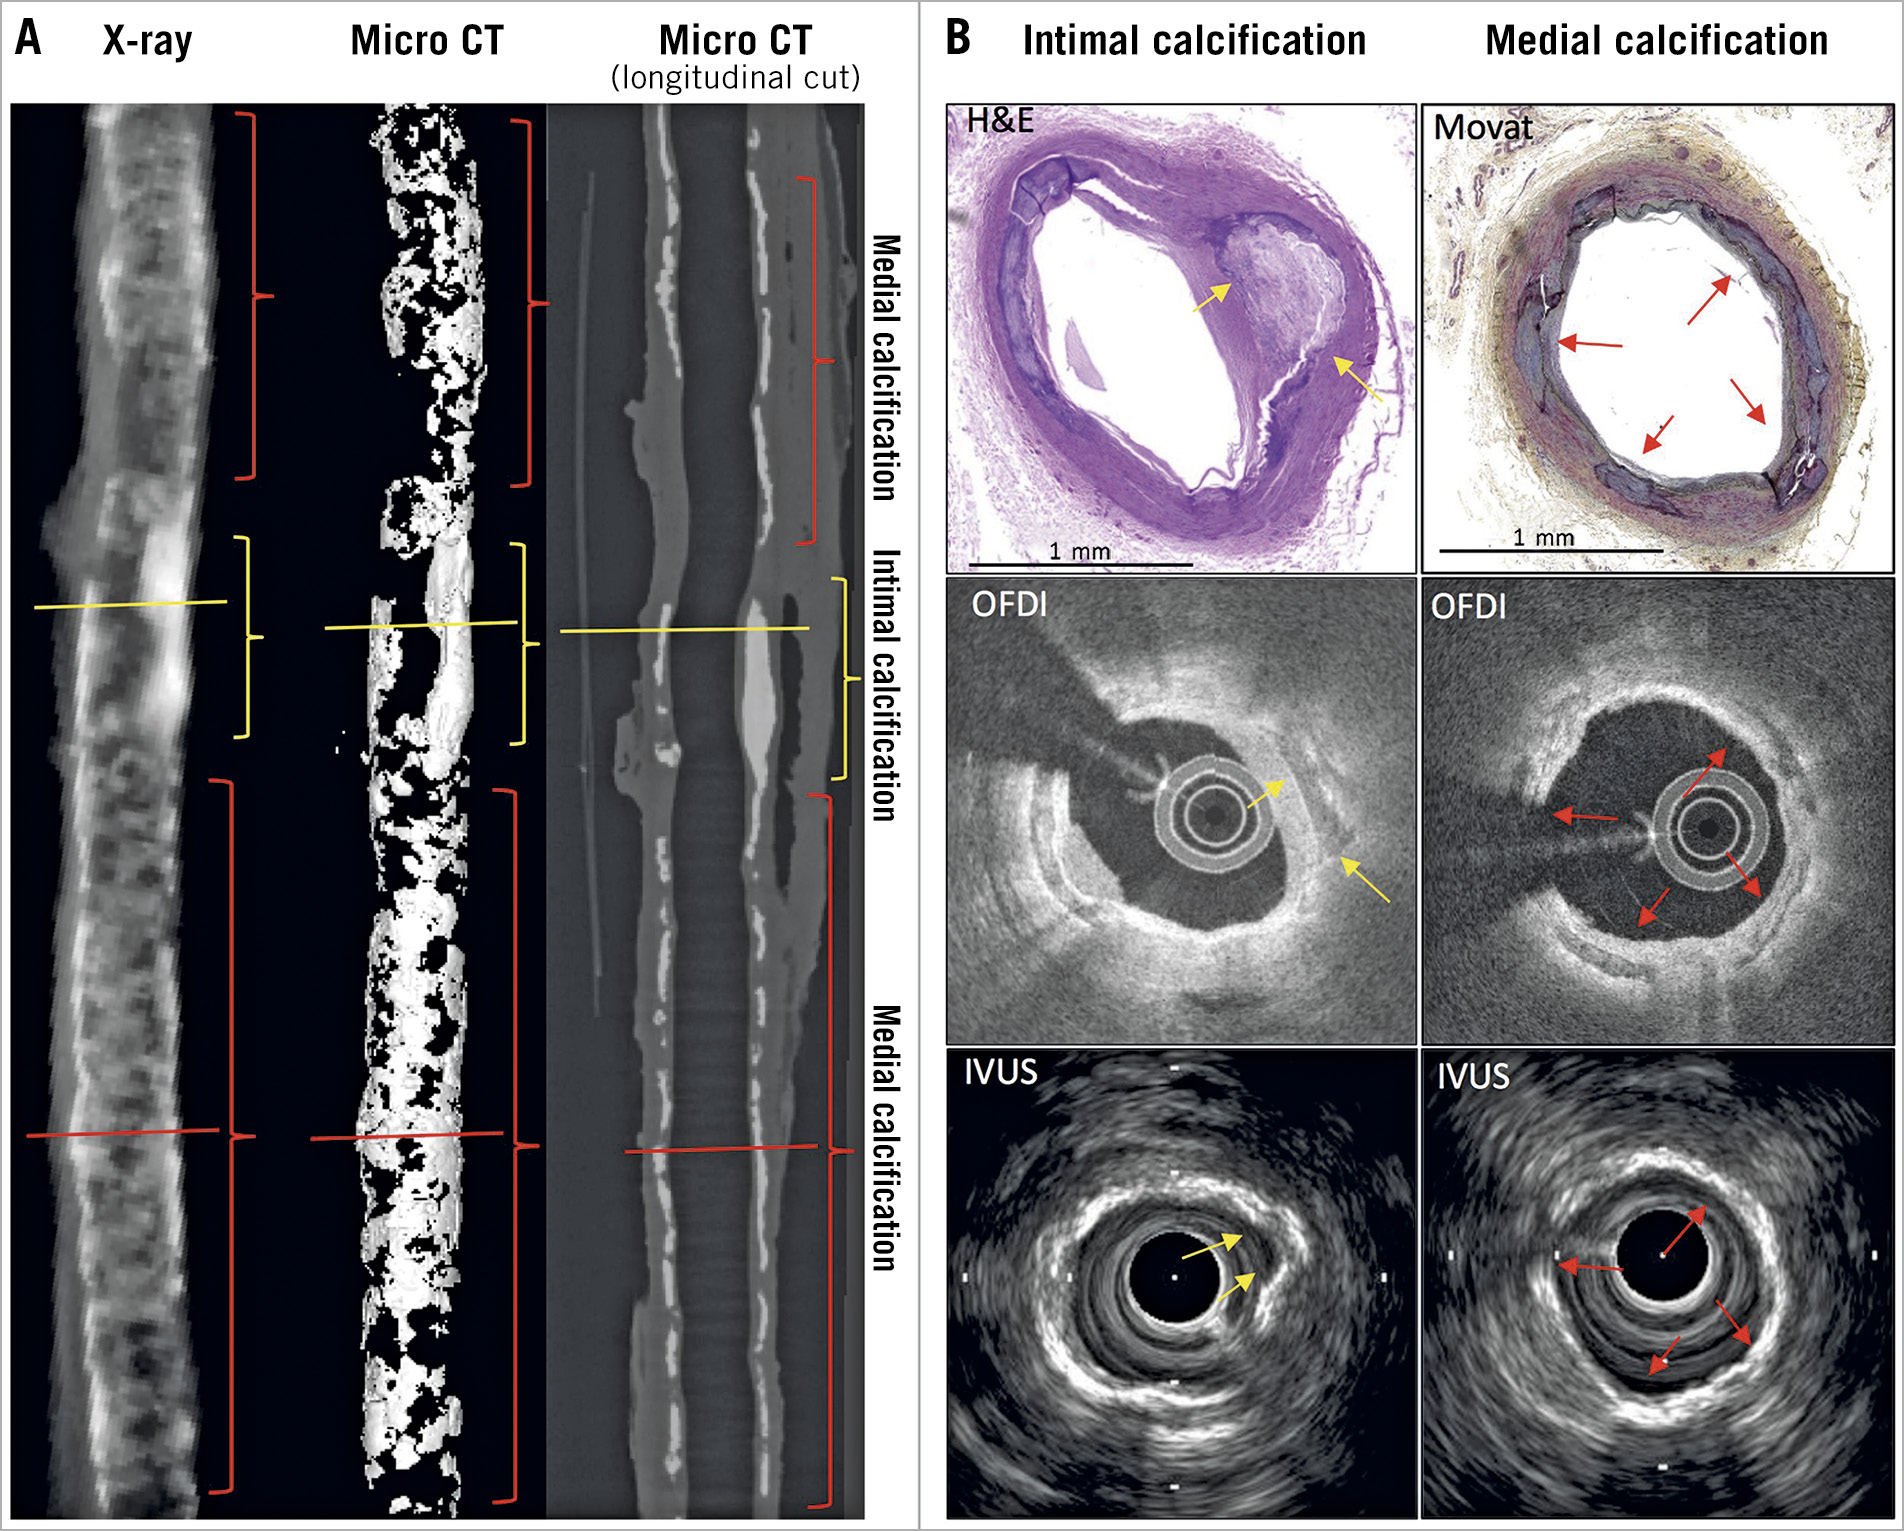 Central illustration. Differences in the longitudinal appearance of intimal versus medial calcification. A) Longitudinal images with X-ray on the left, micro CT highlighting calcification in the middle, and sagittal view of micro CT image in the right panel. Intimal calcification shows longitudinally thick calcification (yellow lines and brackets), whereas medial calcification shows a thin layer of calcification (red lines and brackets). B) Histologic images (H&E [left] and Movat’s pentachrome [right] stains), with corresponding OFDI and IVUS images showing intimal calcification (yellow arrows) corresponding to yellow lines in panel A. The panels on the extreme right show images corresponding to red lines from panel A, indicating medial calcification (red arrows), shown by histology, OFDI and IVUS. CT: computed tomography; IVUS: intravascular ultrasound; OFDI: optical frequency domain imaging